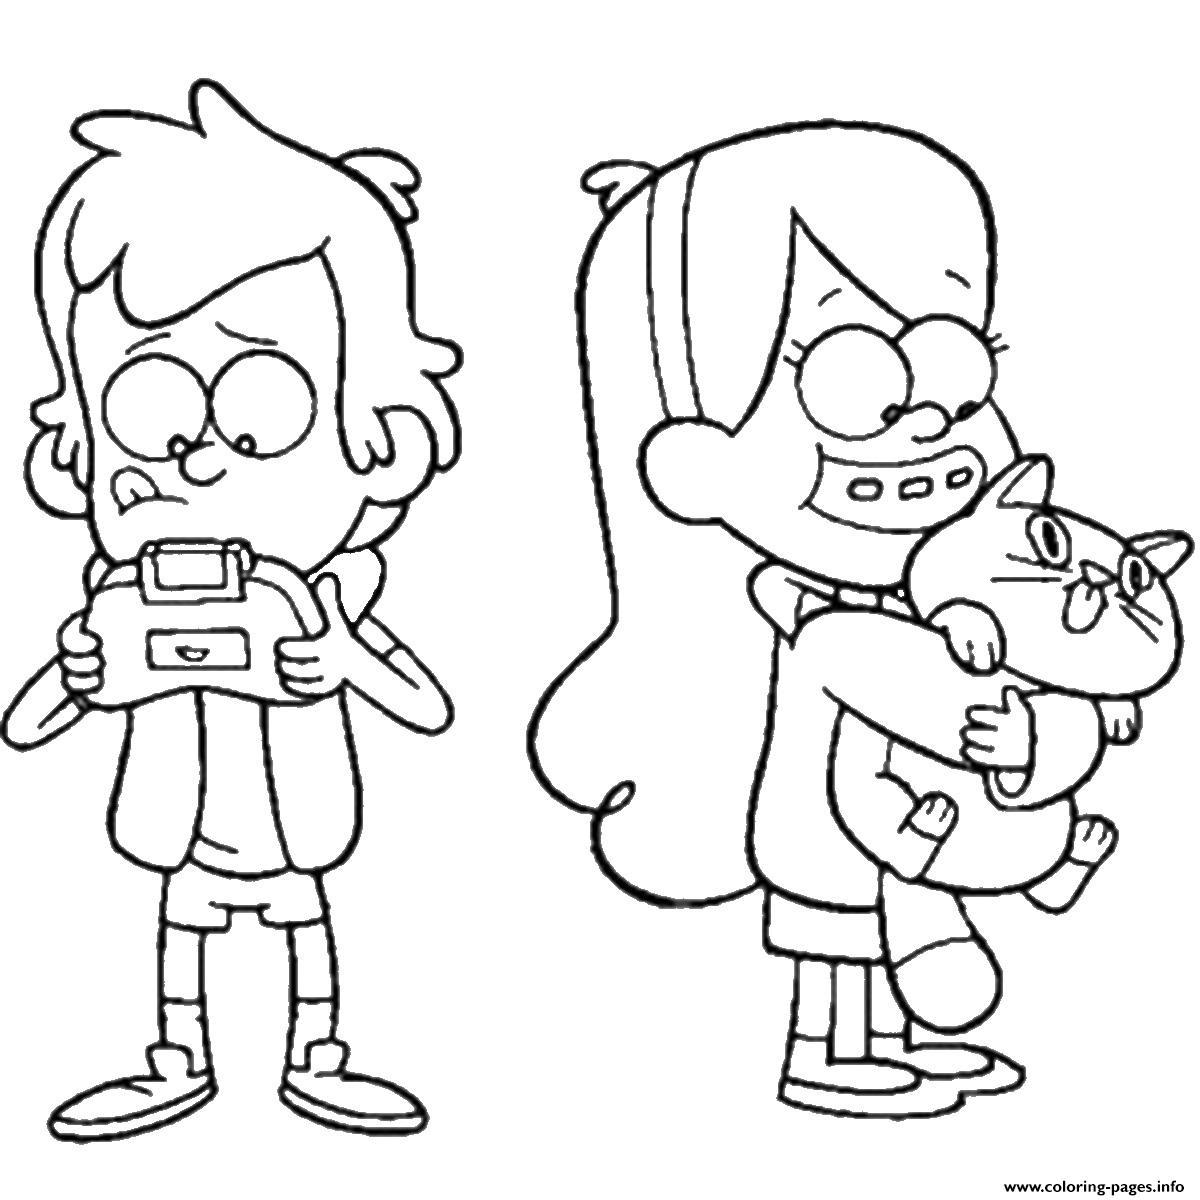 Dipper and Mabel from Gravity Falls Coloring Pages